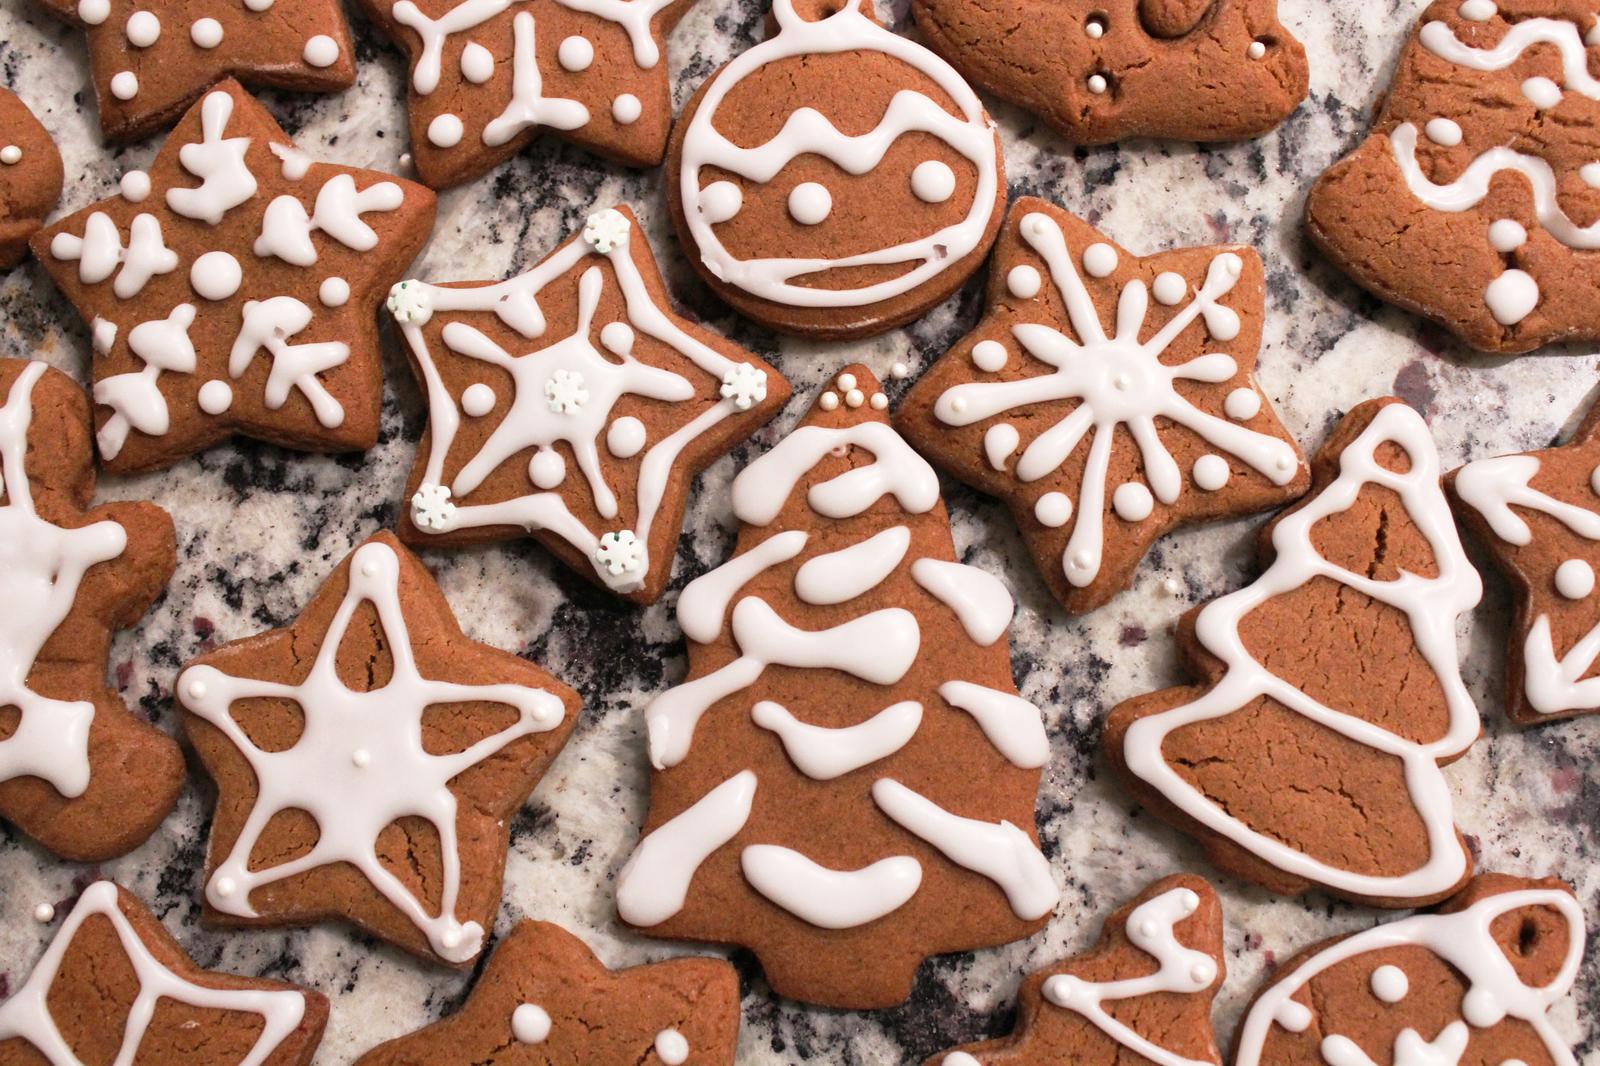 What Cake Matches Your Vibe? Gingerbread